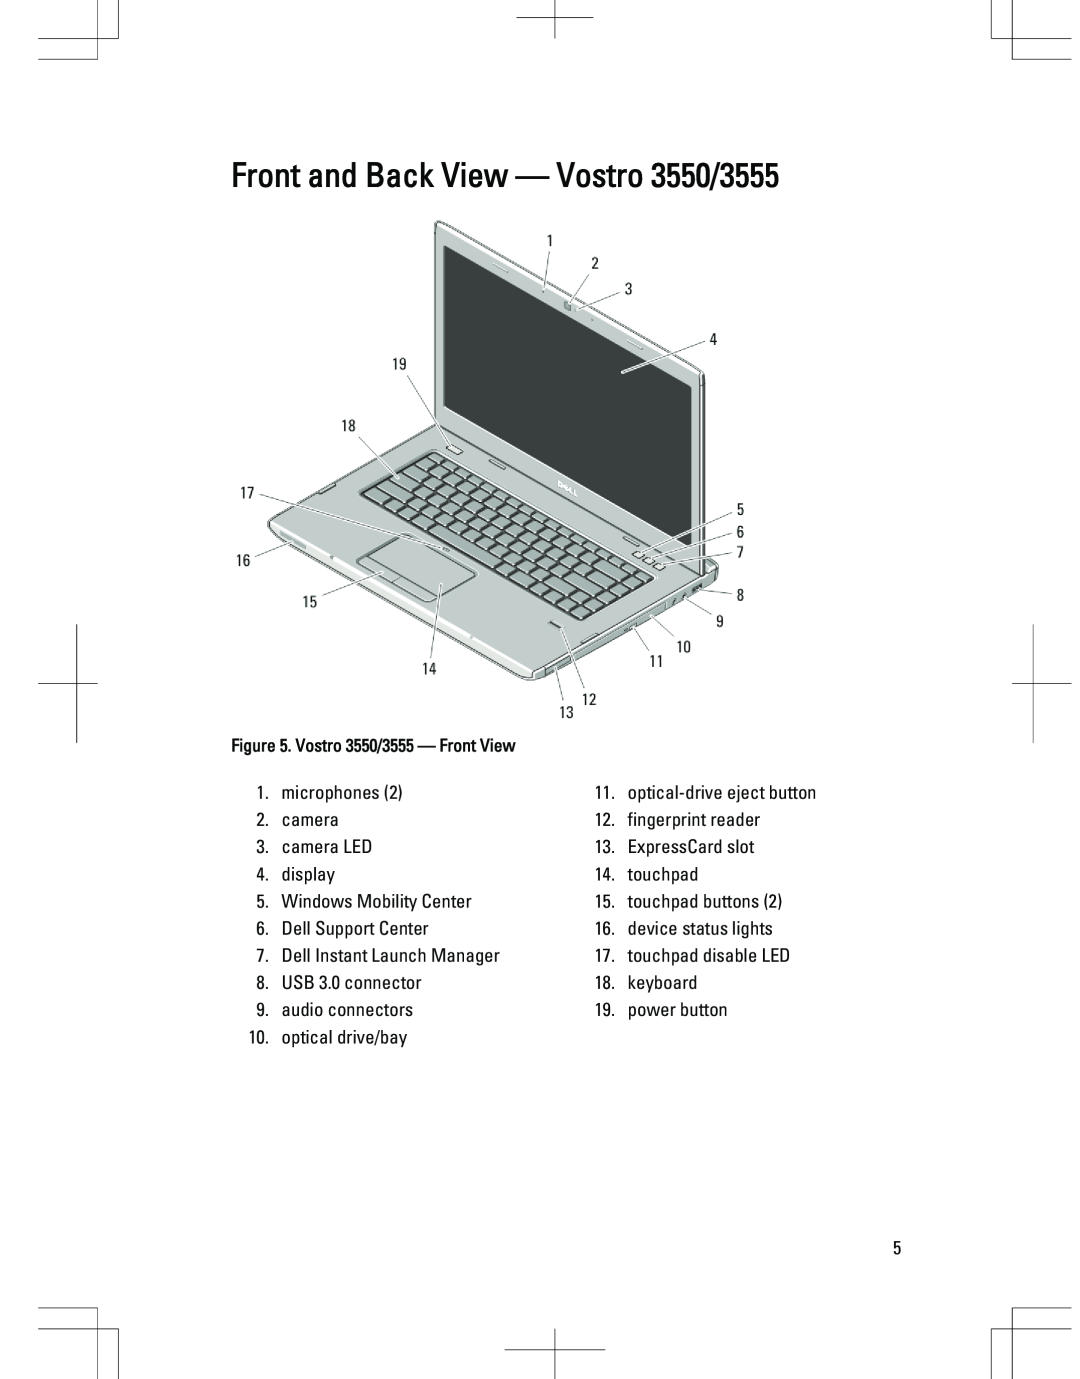 Dell 3750, 3350, 3450 manual Front and Back View - Vostro 3550/3555, Vostro 3550/3555 - Front View 